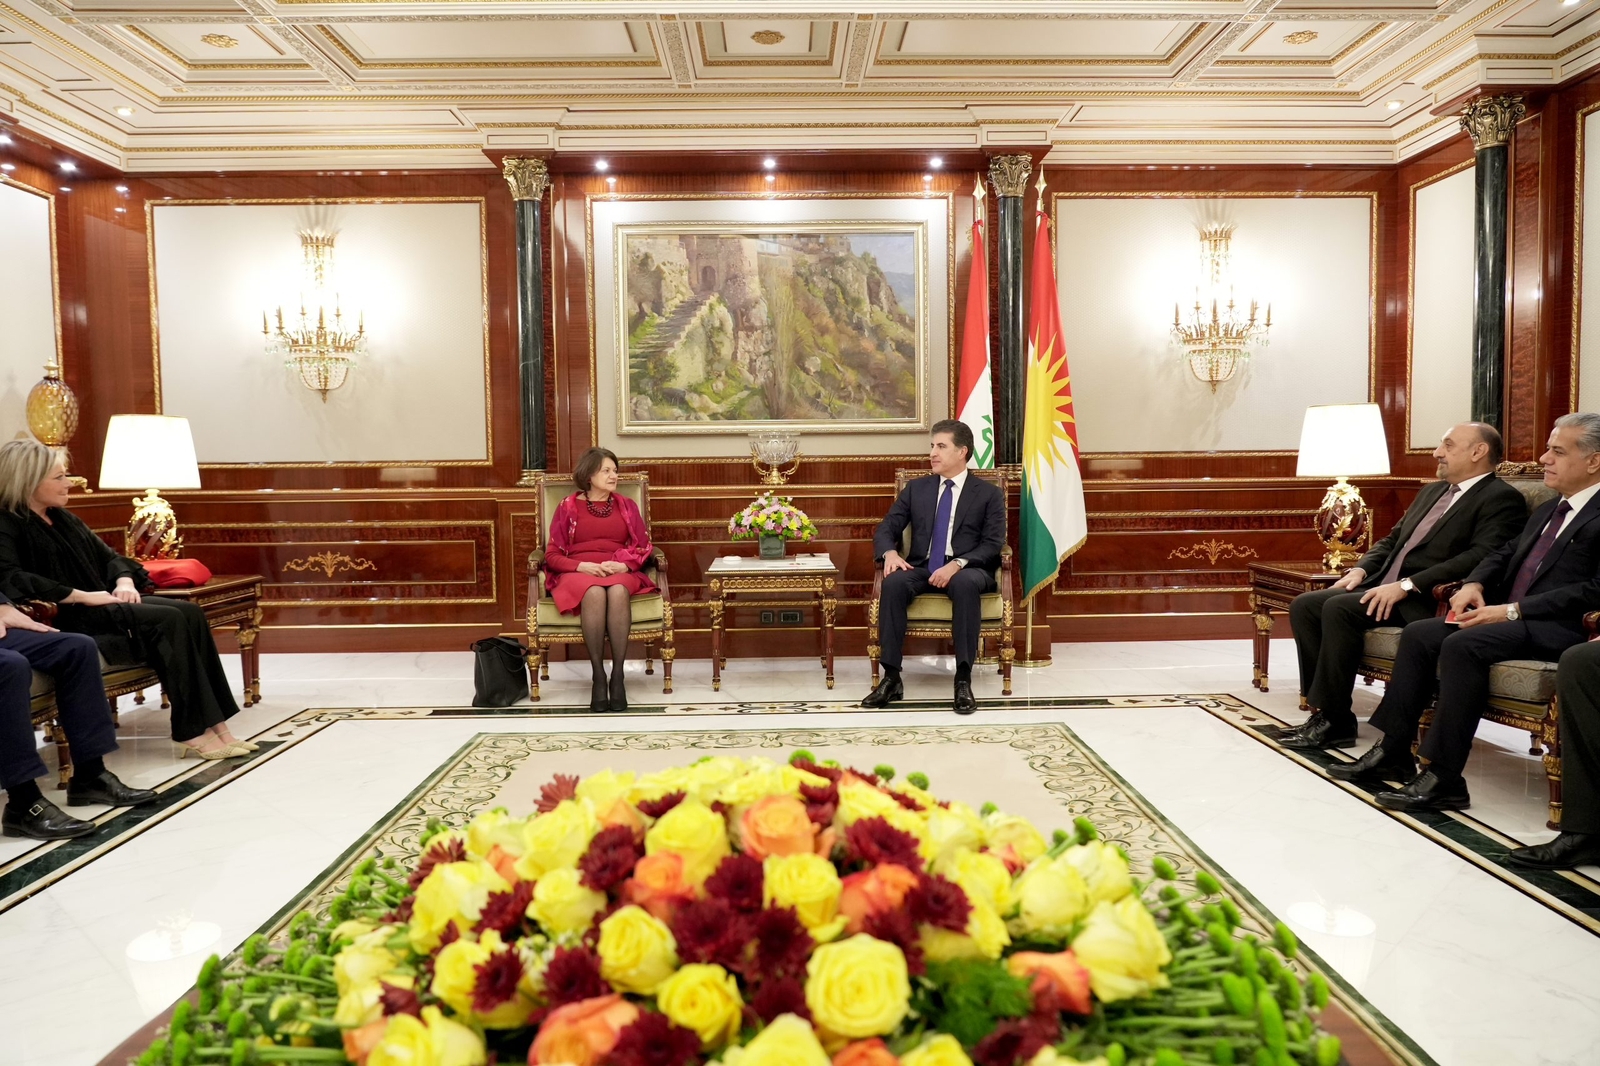 President Nechirvan Barzani meets with a high level UN delegation